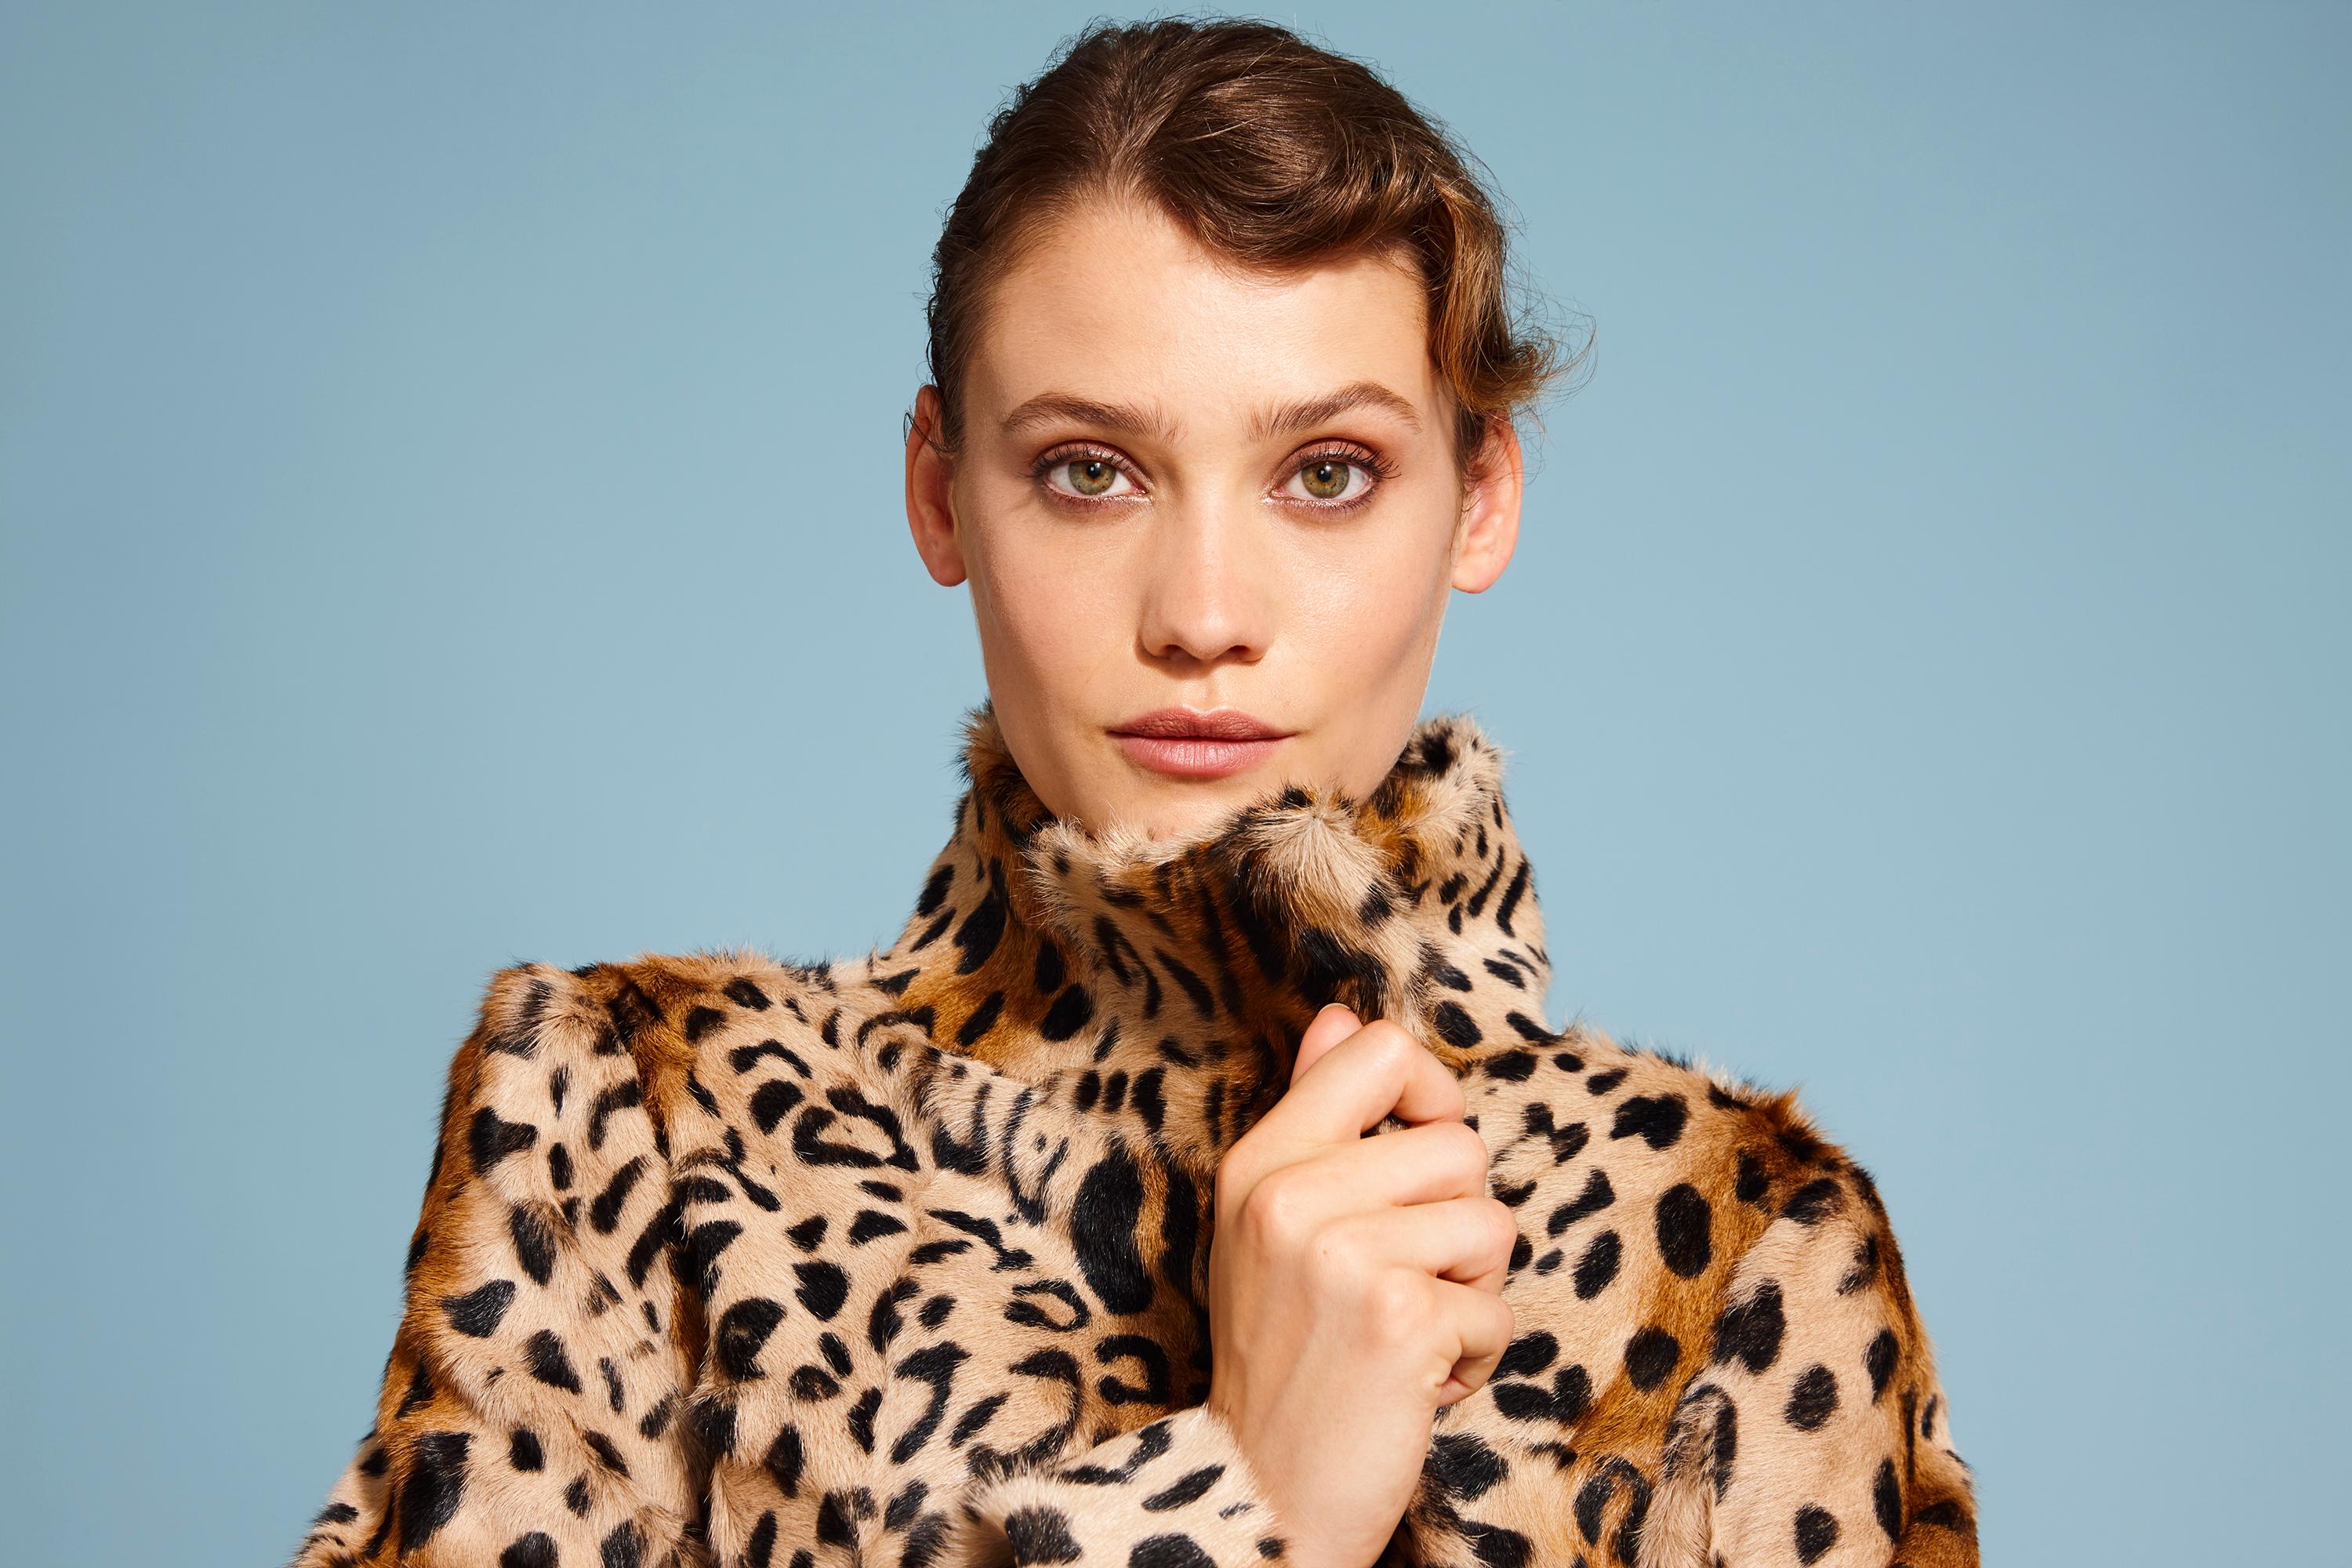 
Verheyen London High Collar Leopard Print Coat in Natural Goat Hair Fur UK 14
RRP Price £1,695

This Leopard print coat is Verheyen London’s classic staple for effortless style and glamour. Verheyen London is a luxury brand who specialises in